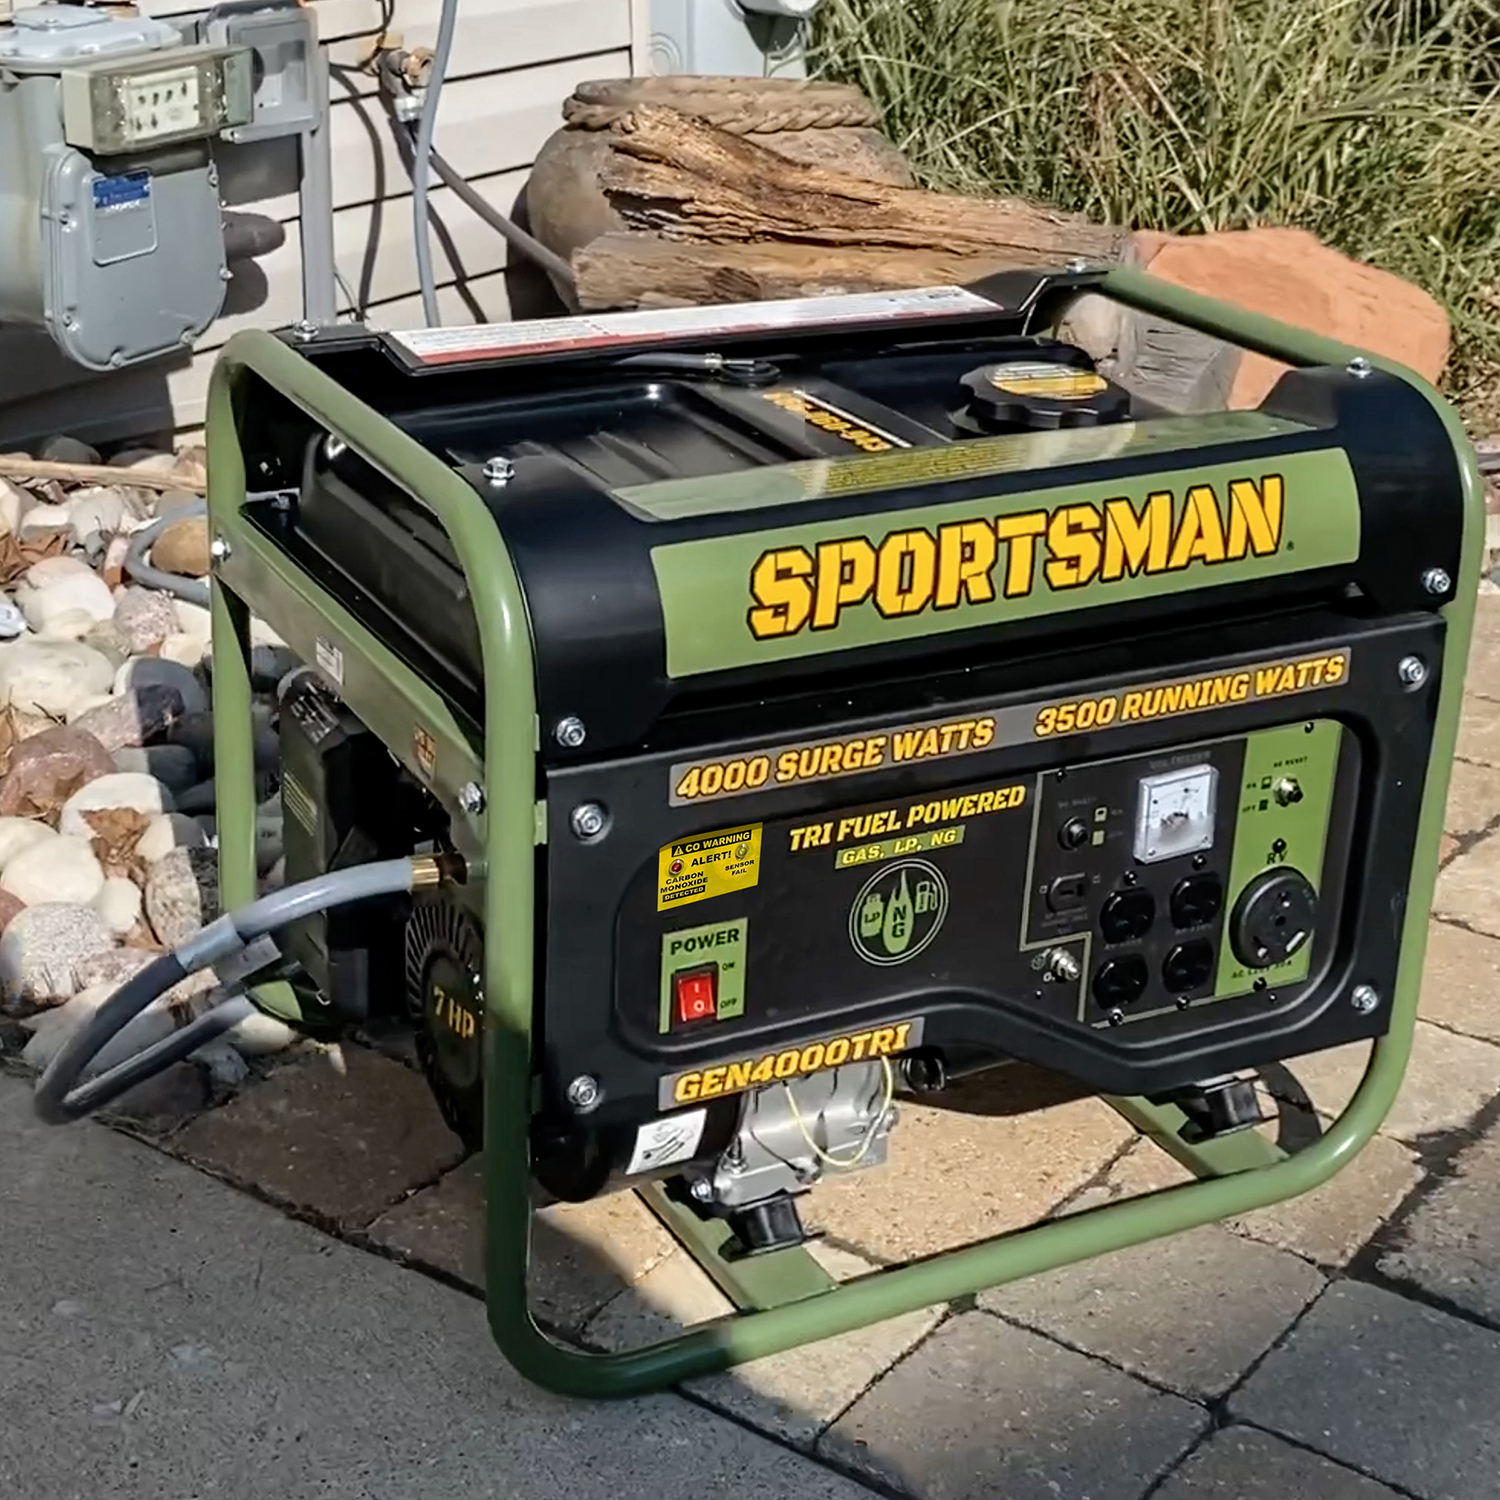 GEN4000 Tri Fuel Sportsman Generator For Power Outages